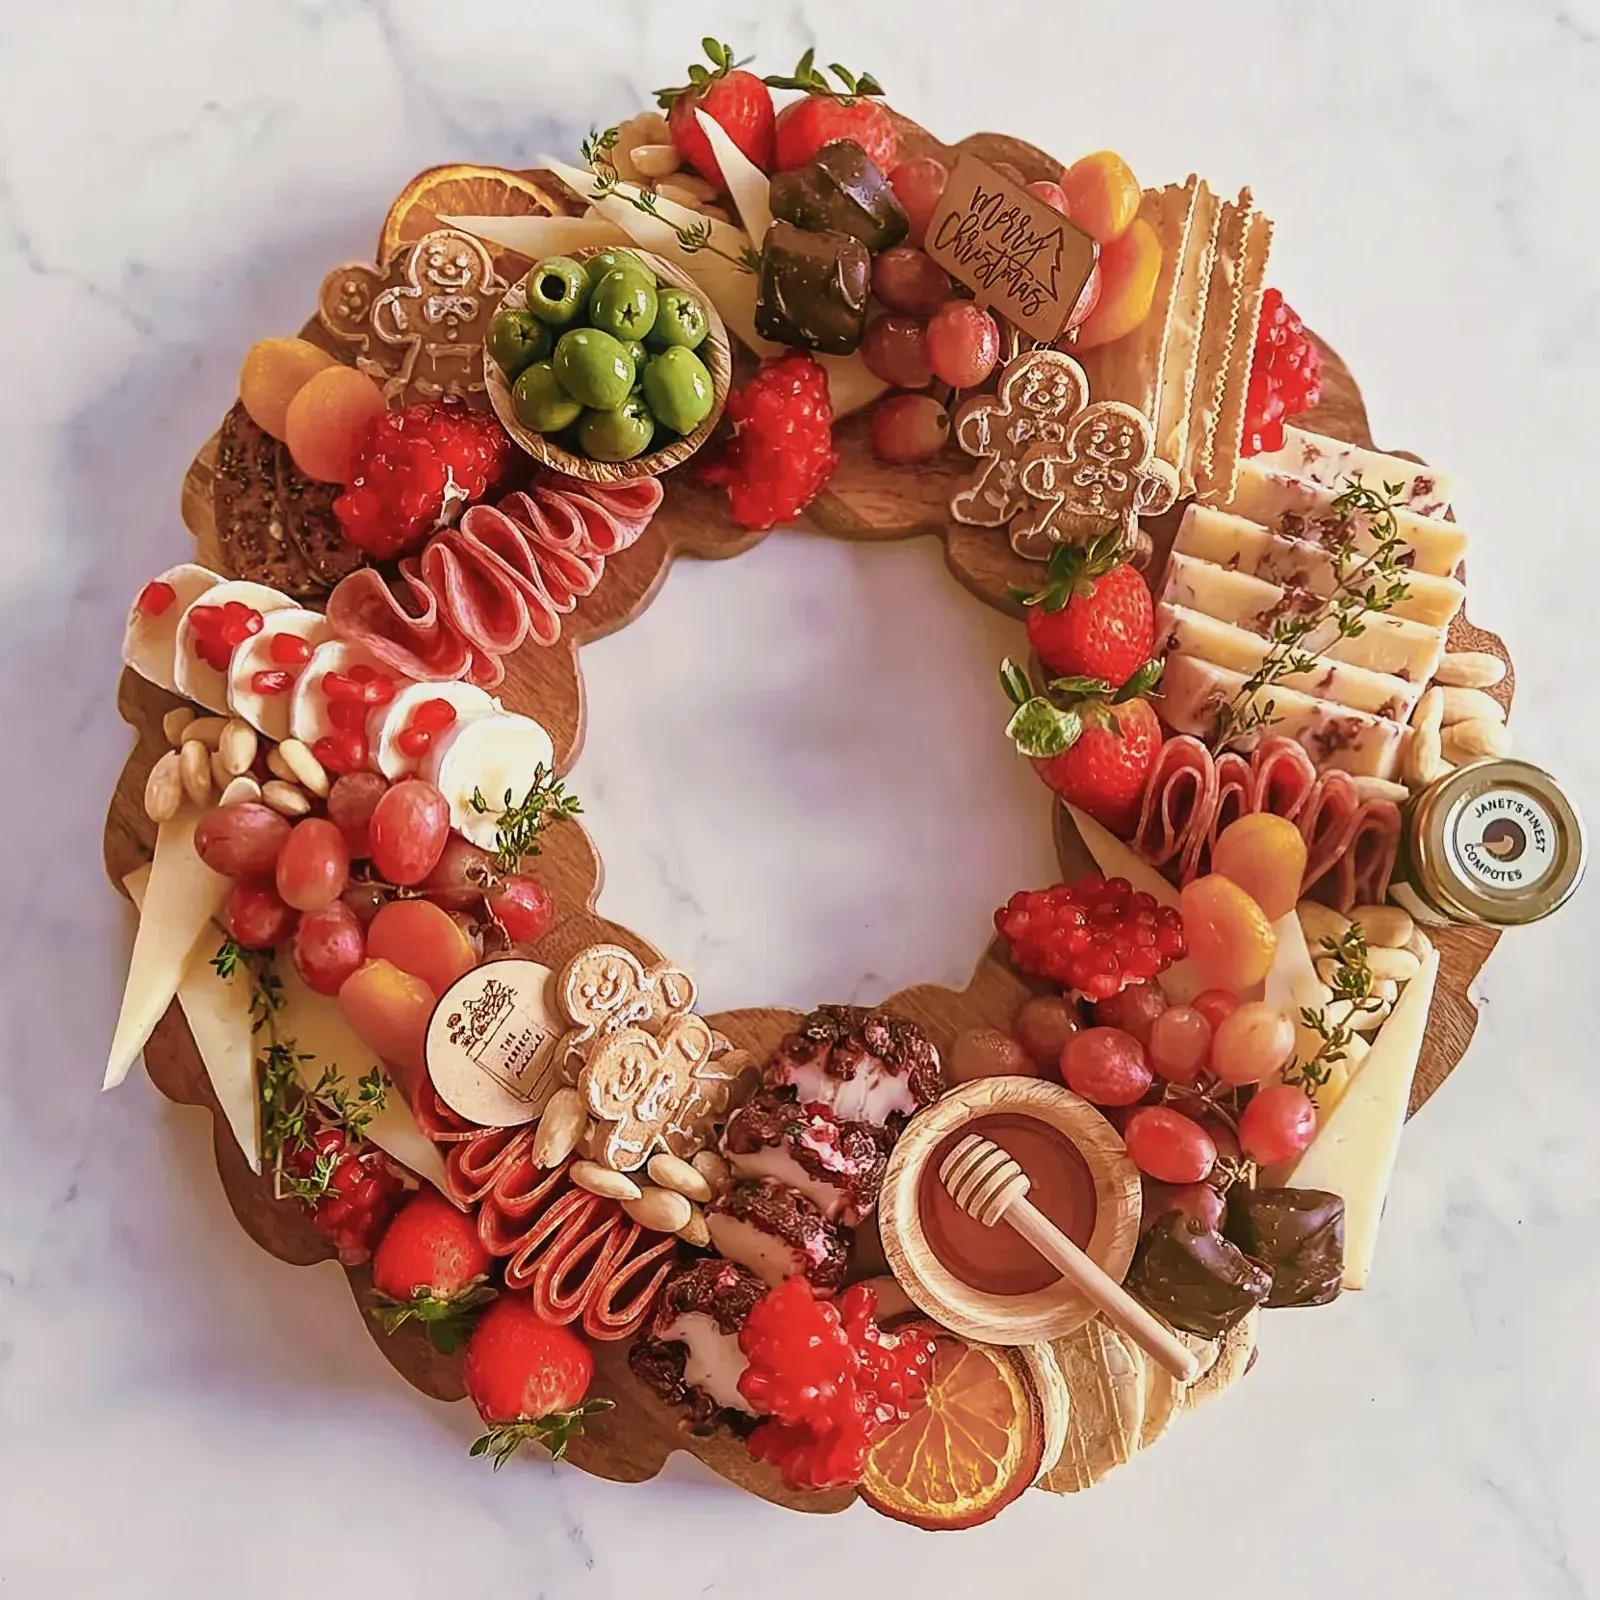 Colorful and vibrant wreath of fruits and vegetables on a marble surface